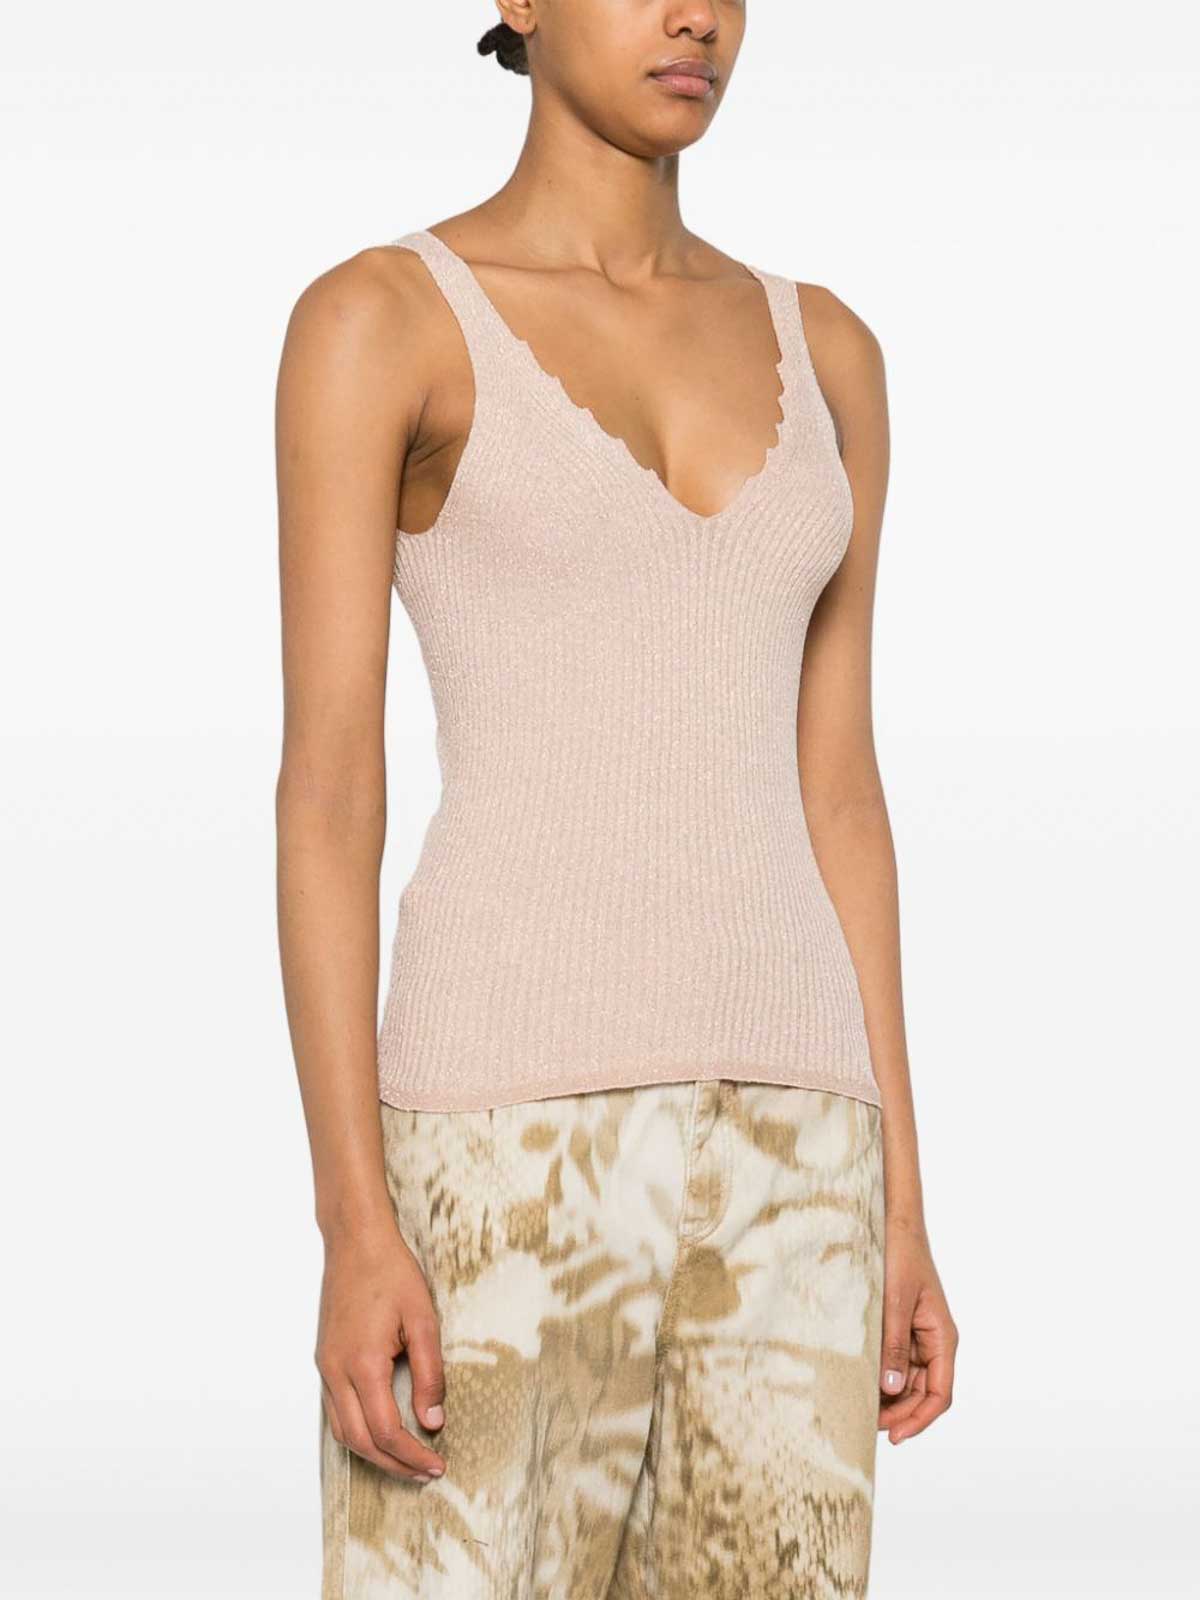 Shop Twinset Top - Color Carne Y Neutral In Nude & Neutrals